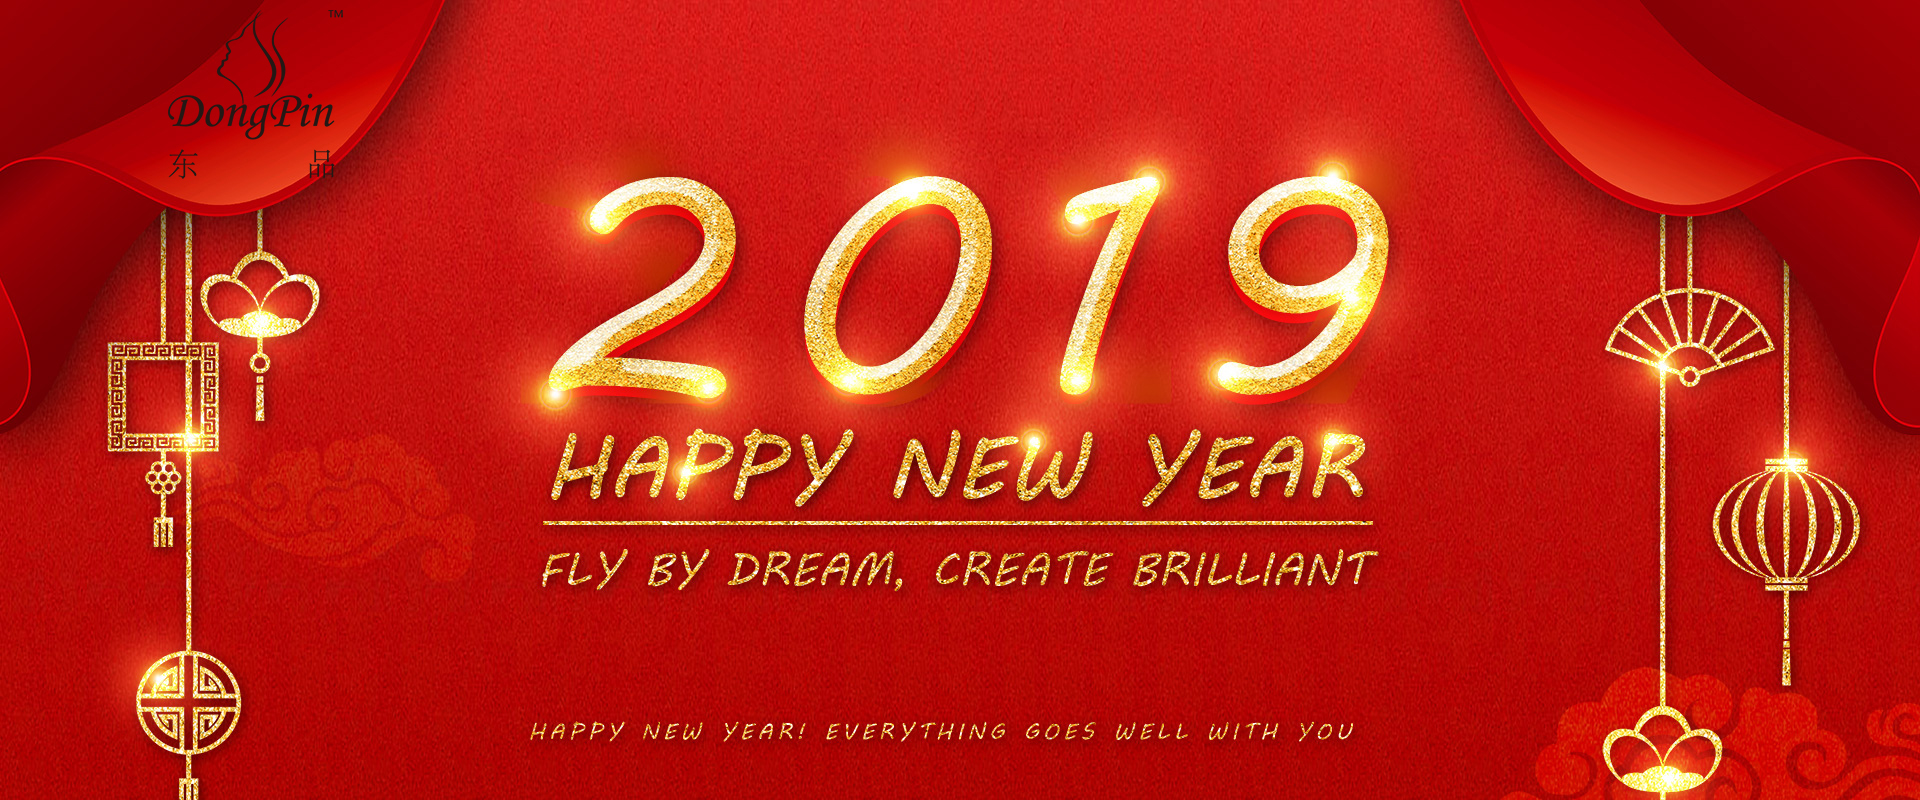 Electric Physiotherapy Bed Wish You Happy 2019!